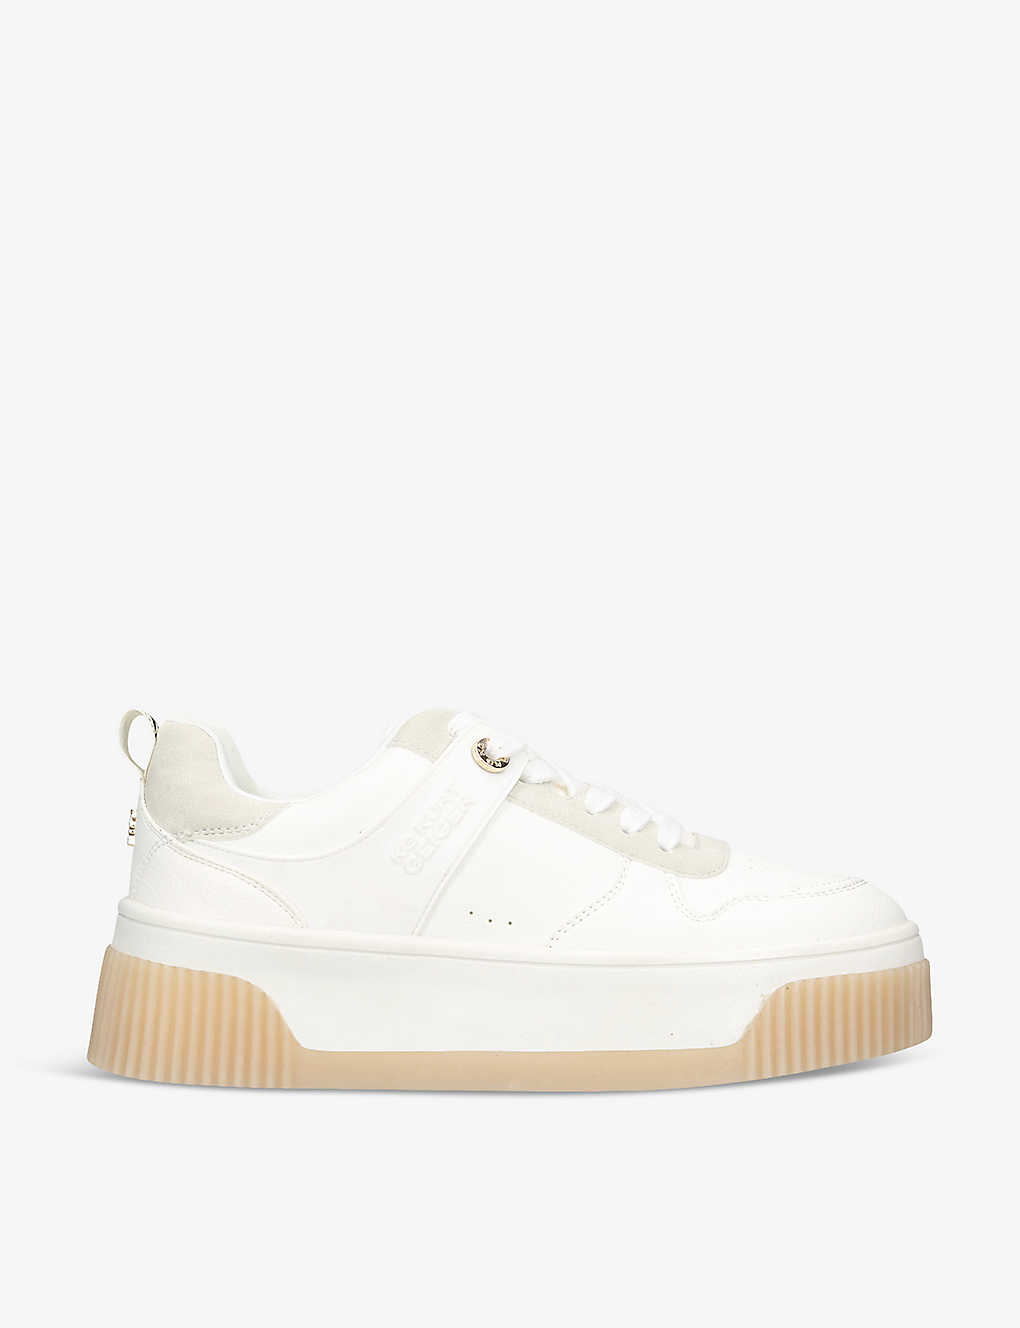 Kg Kurt Geiger Landon Faux-leather Low-top Trainers In White/comb